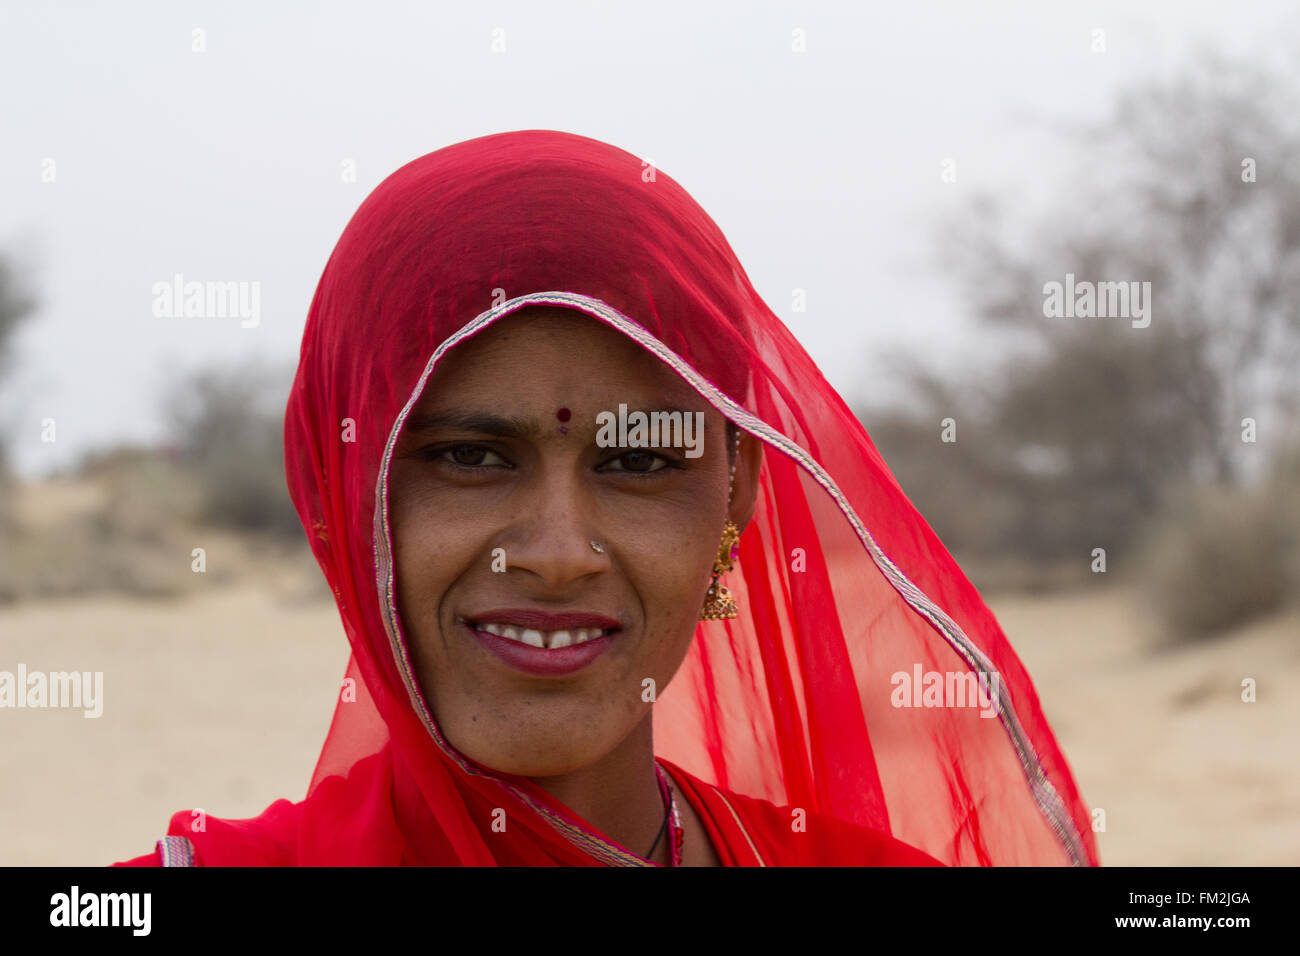 Asia, India,Rajasthan, Manvar,desert, sand dunes. Woman in traditional headscarf. Stock Photo